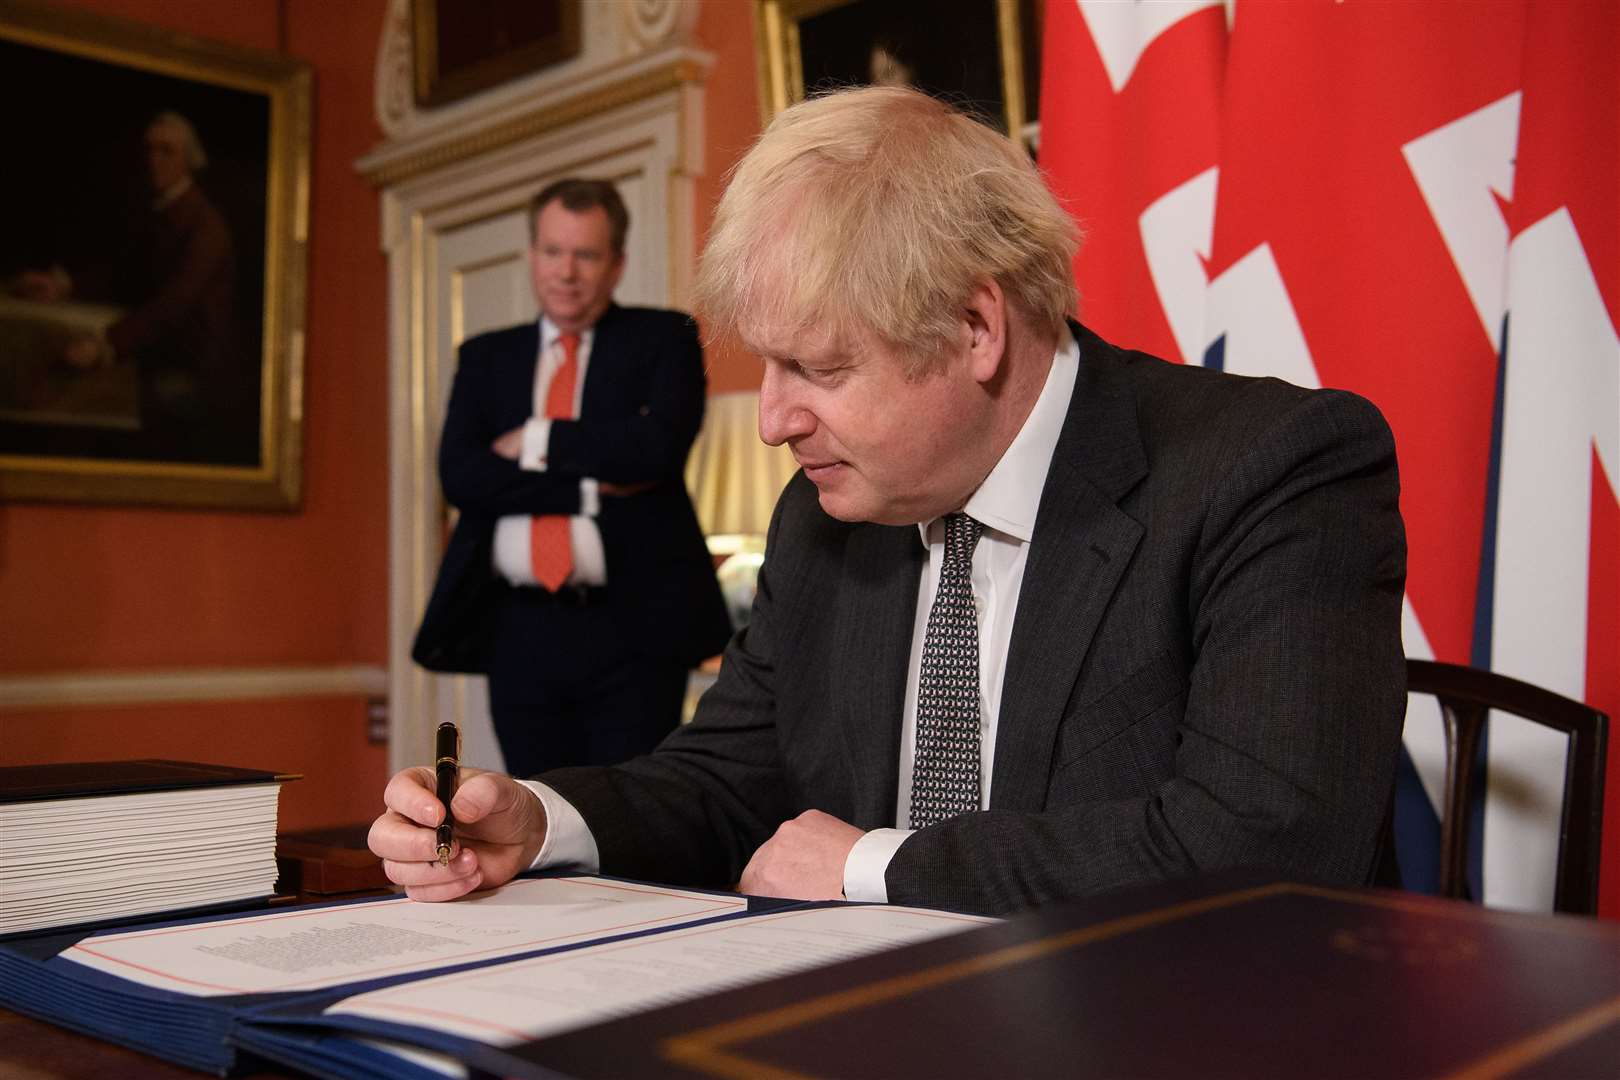 UK chief trade negotiator, David Frost looks on as Prime Minister Boris Johnson signs the EU-UK Trade and Co-operation Agreement at 10 Downing Street (Leon Neal/PA)